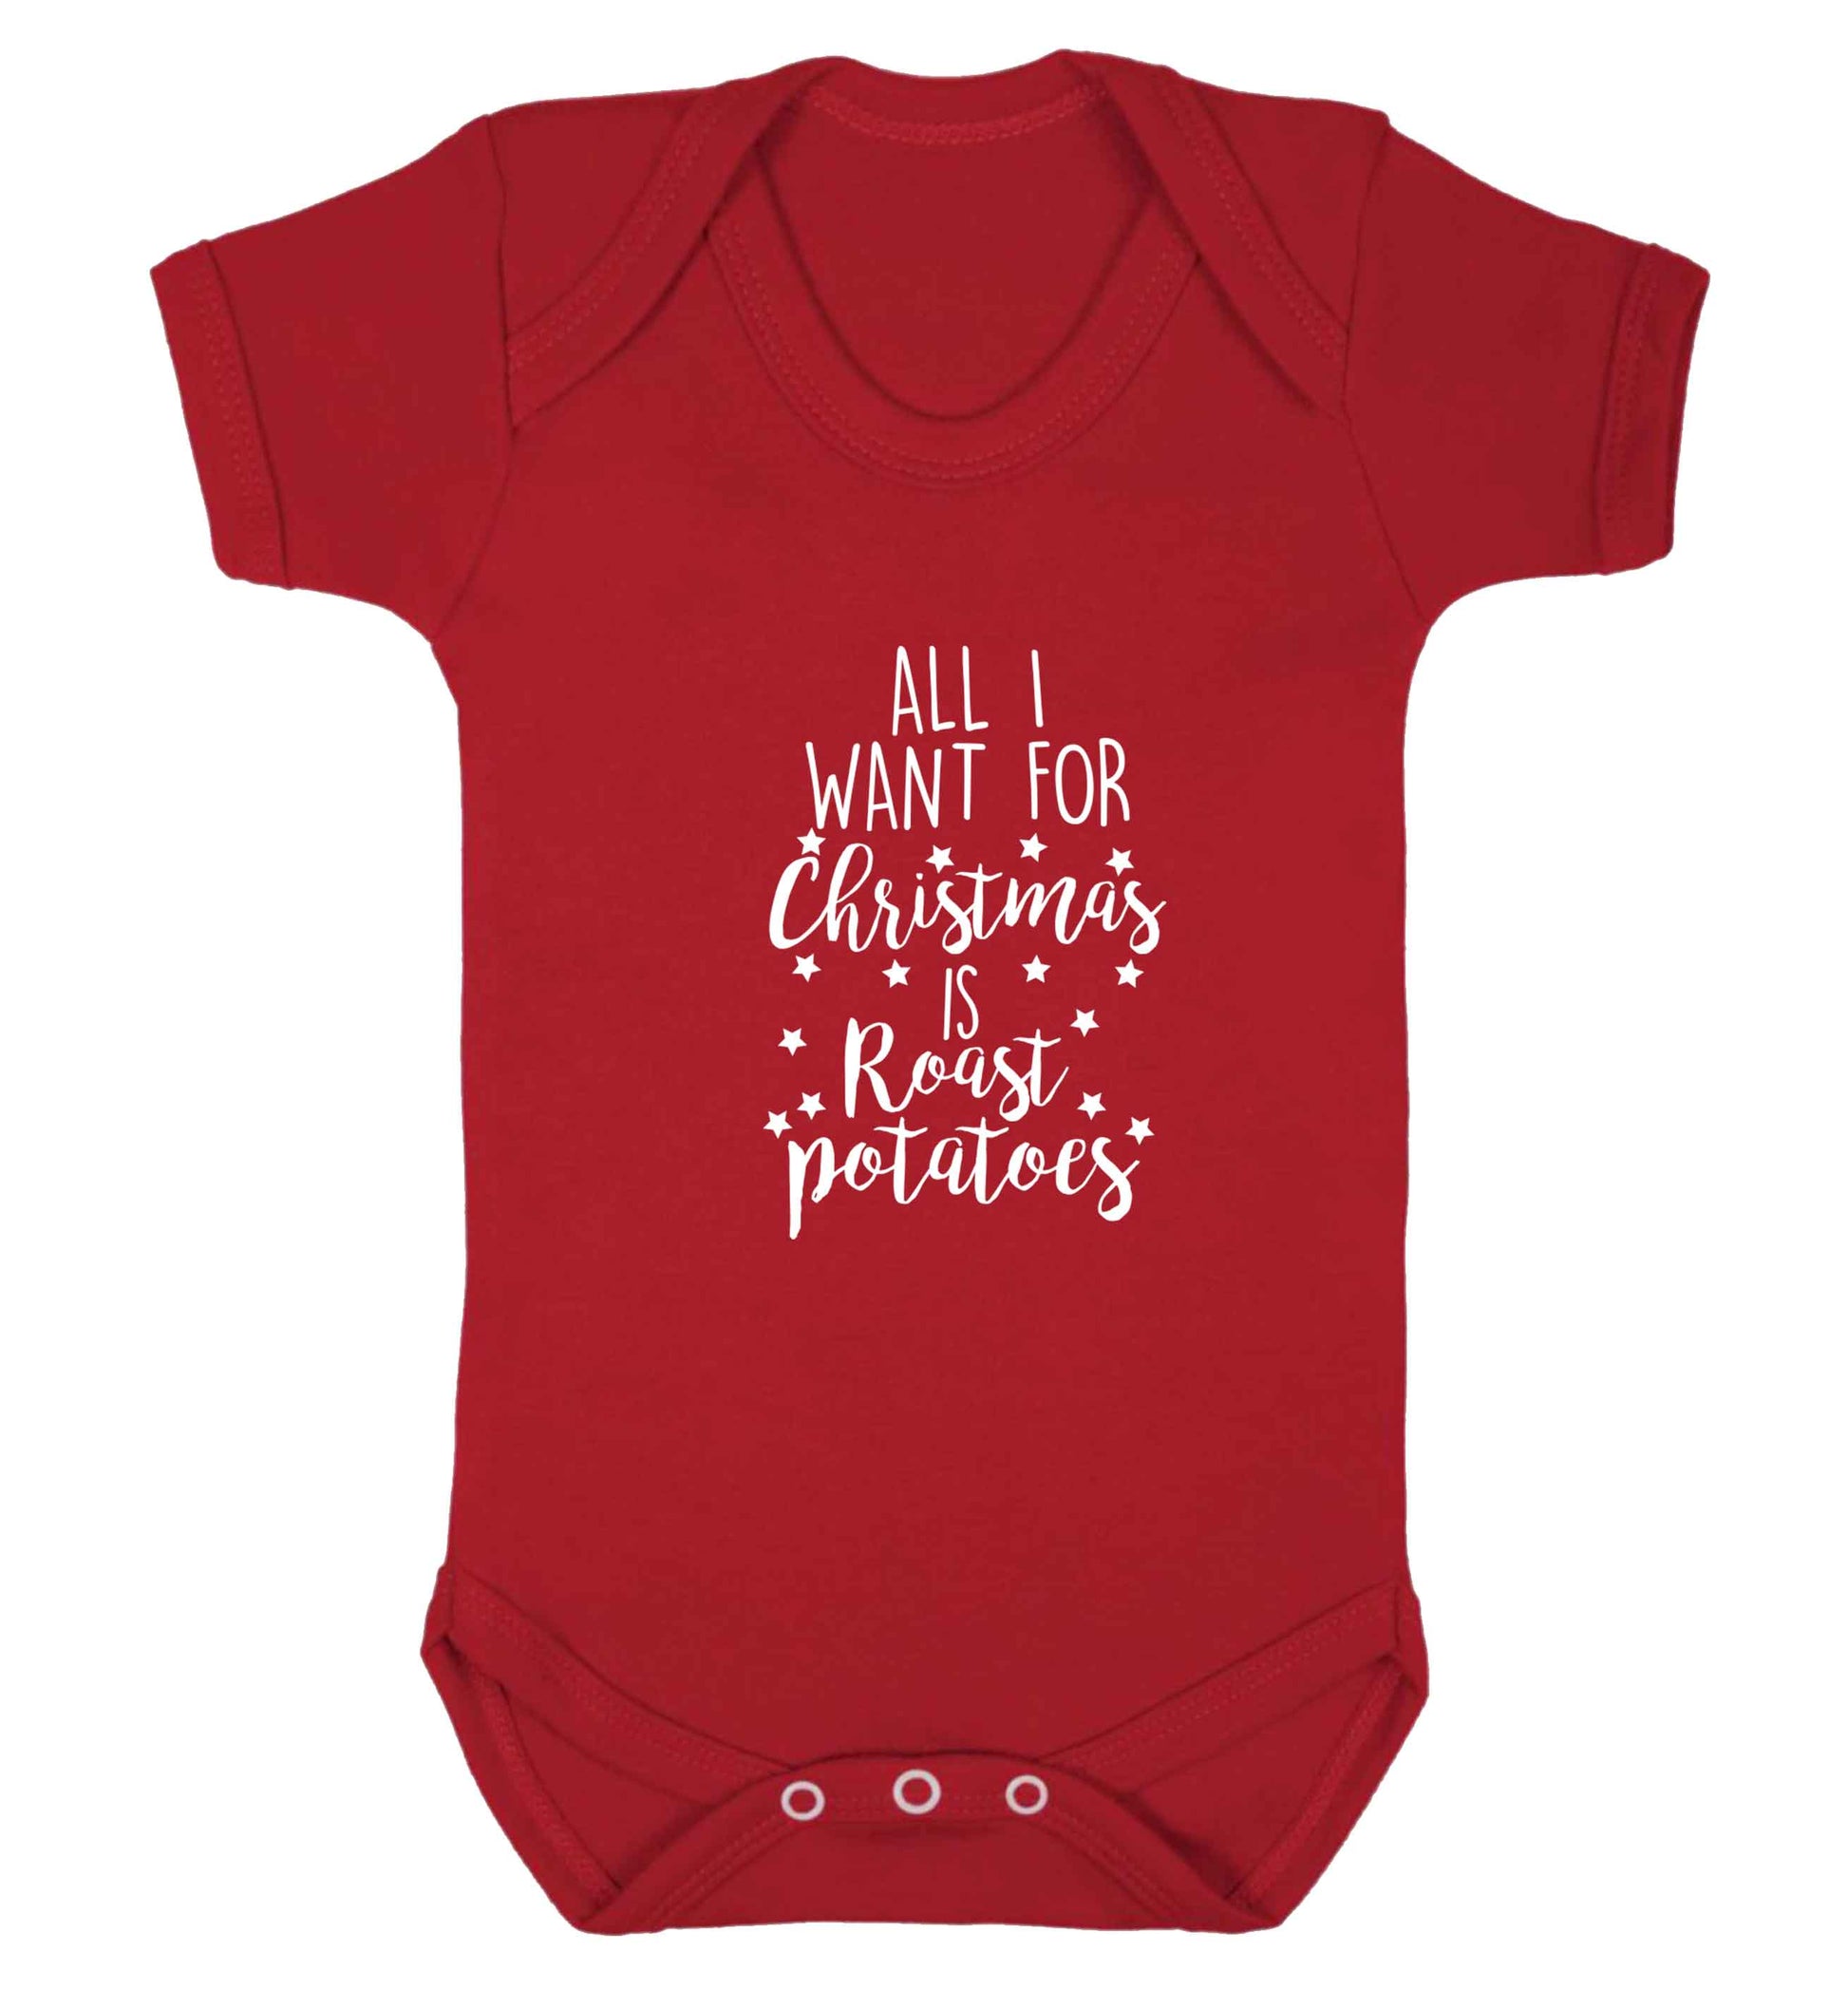 All I want for Christmas is roast potatoes baby vest red 18-24 months